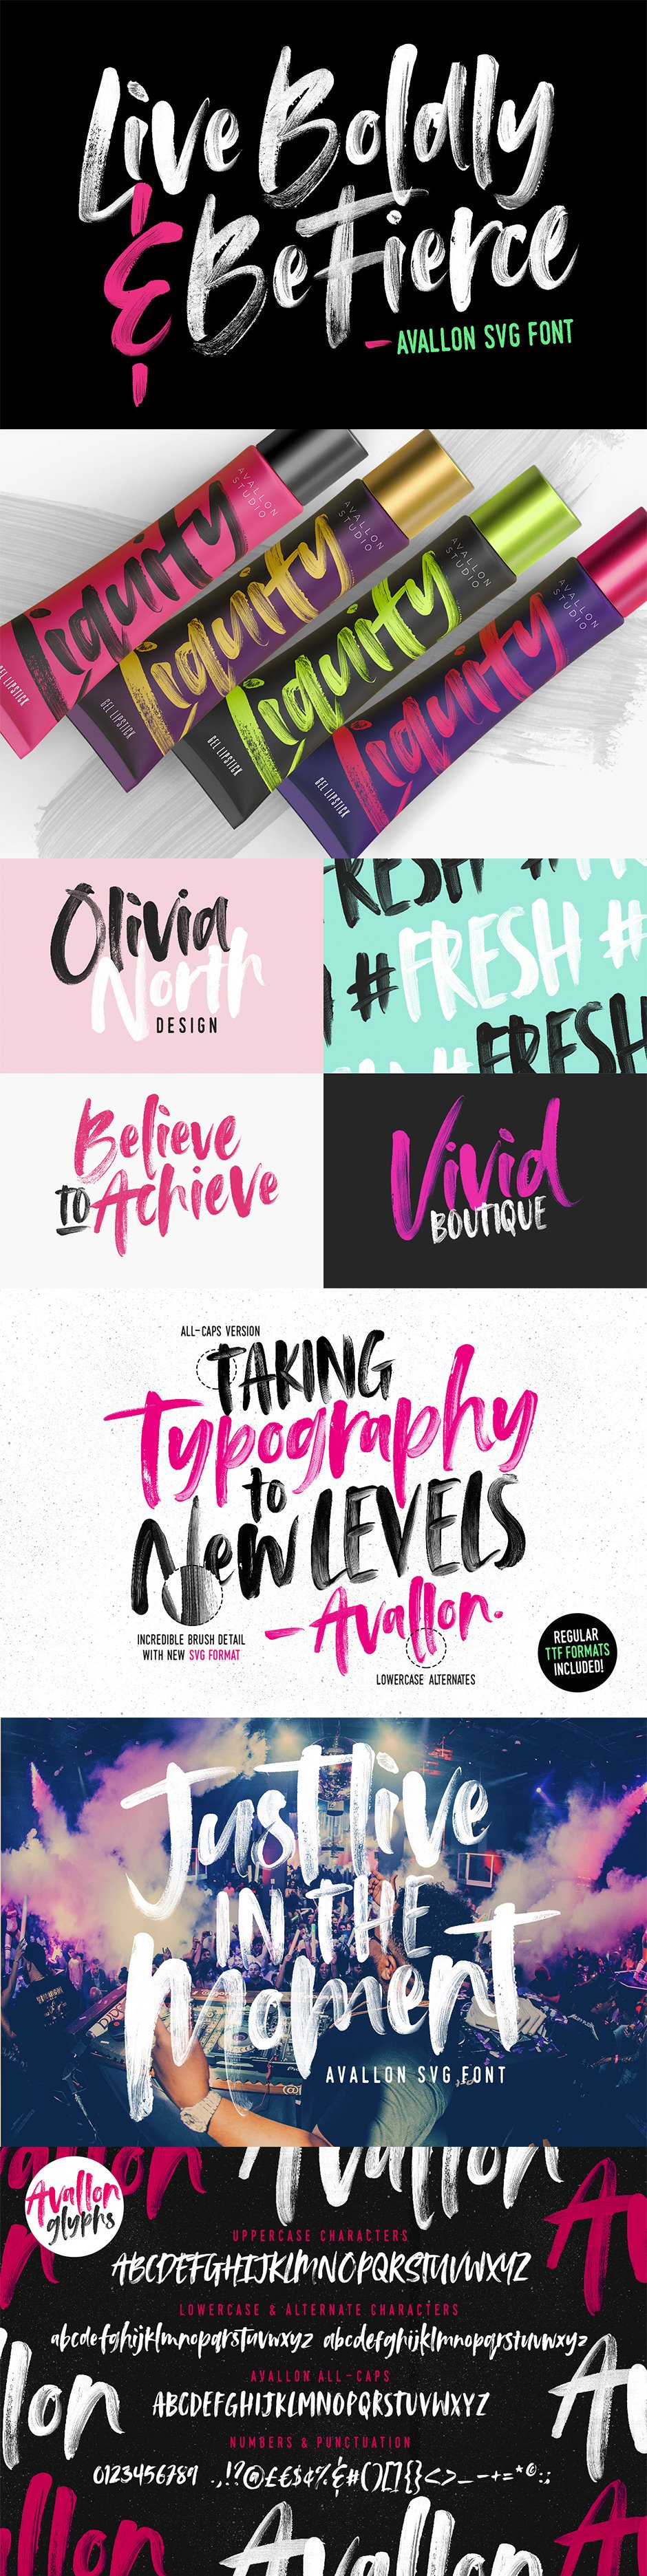 The Definitive Type Lovers Collection Font bundle